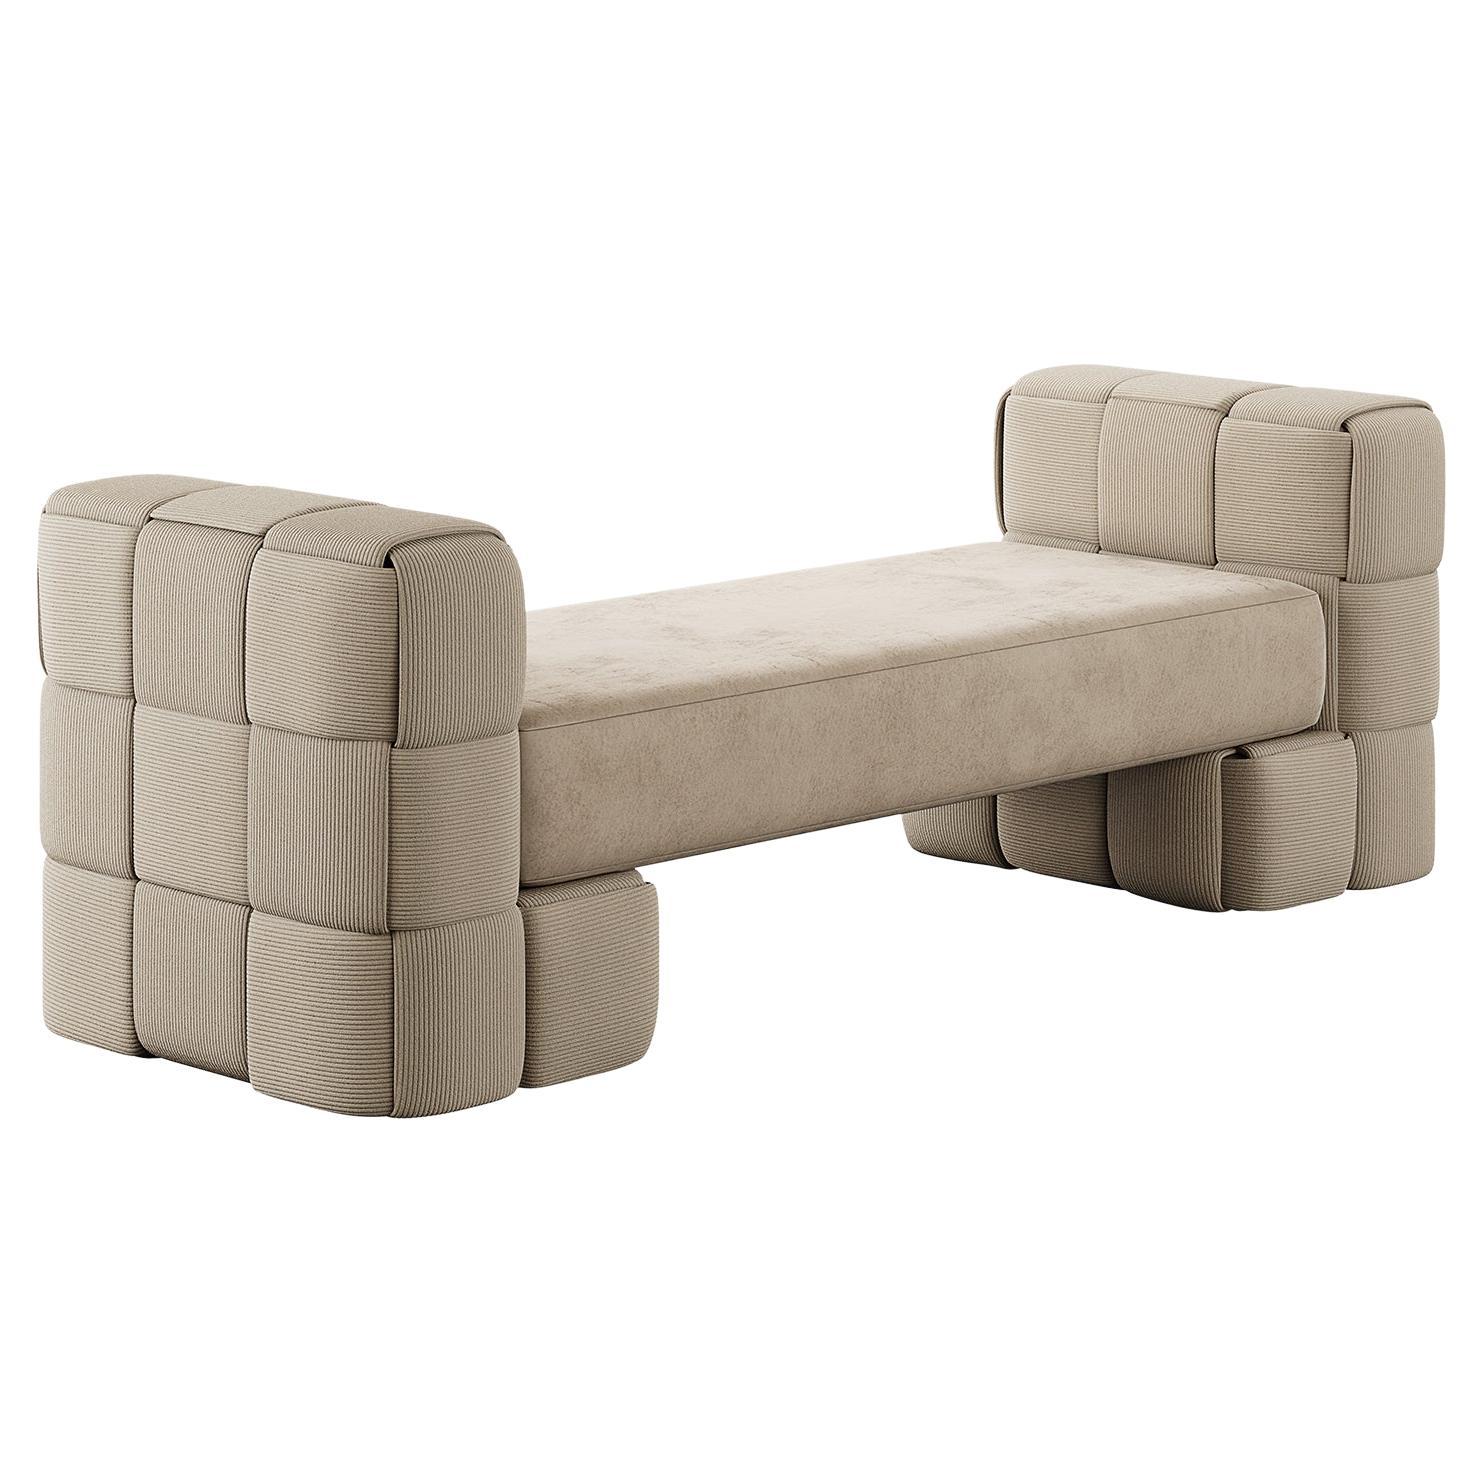 Contemporary Woven Upholstered Bench with Arms Light Brown Beige Corduroy